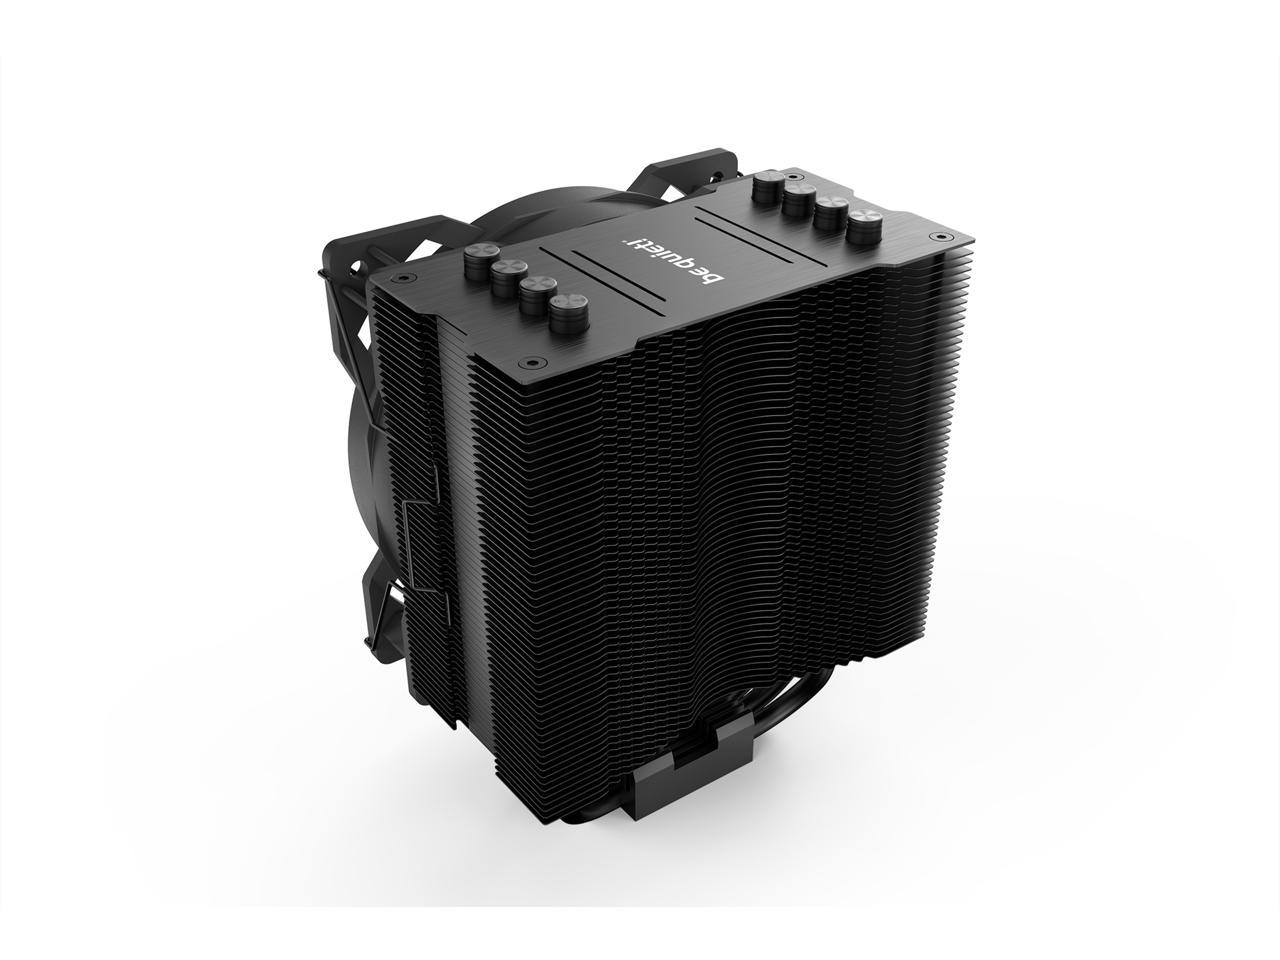 be quiet! Pure Rock 2 Black, CPU cooler, 150W TDP, incl. Pure Wings 2 120mm PWM fan, HDT technology